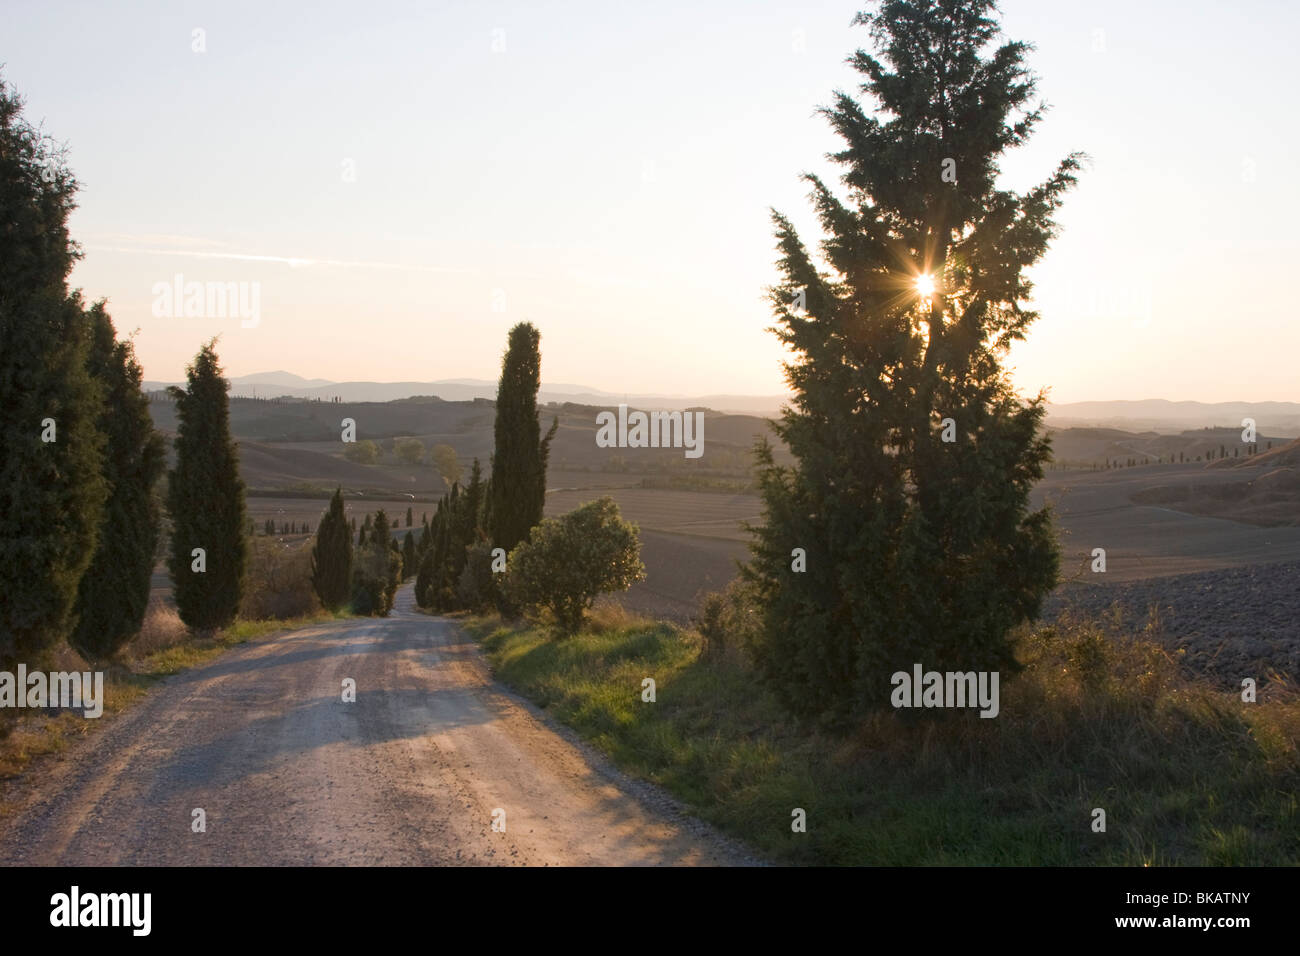 Cypresses alley in Tuscany, Italy Stock Photo